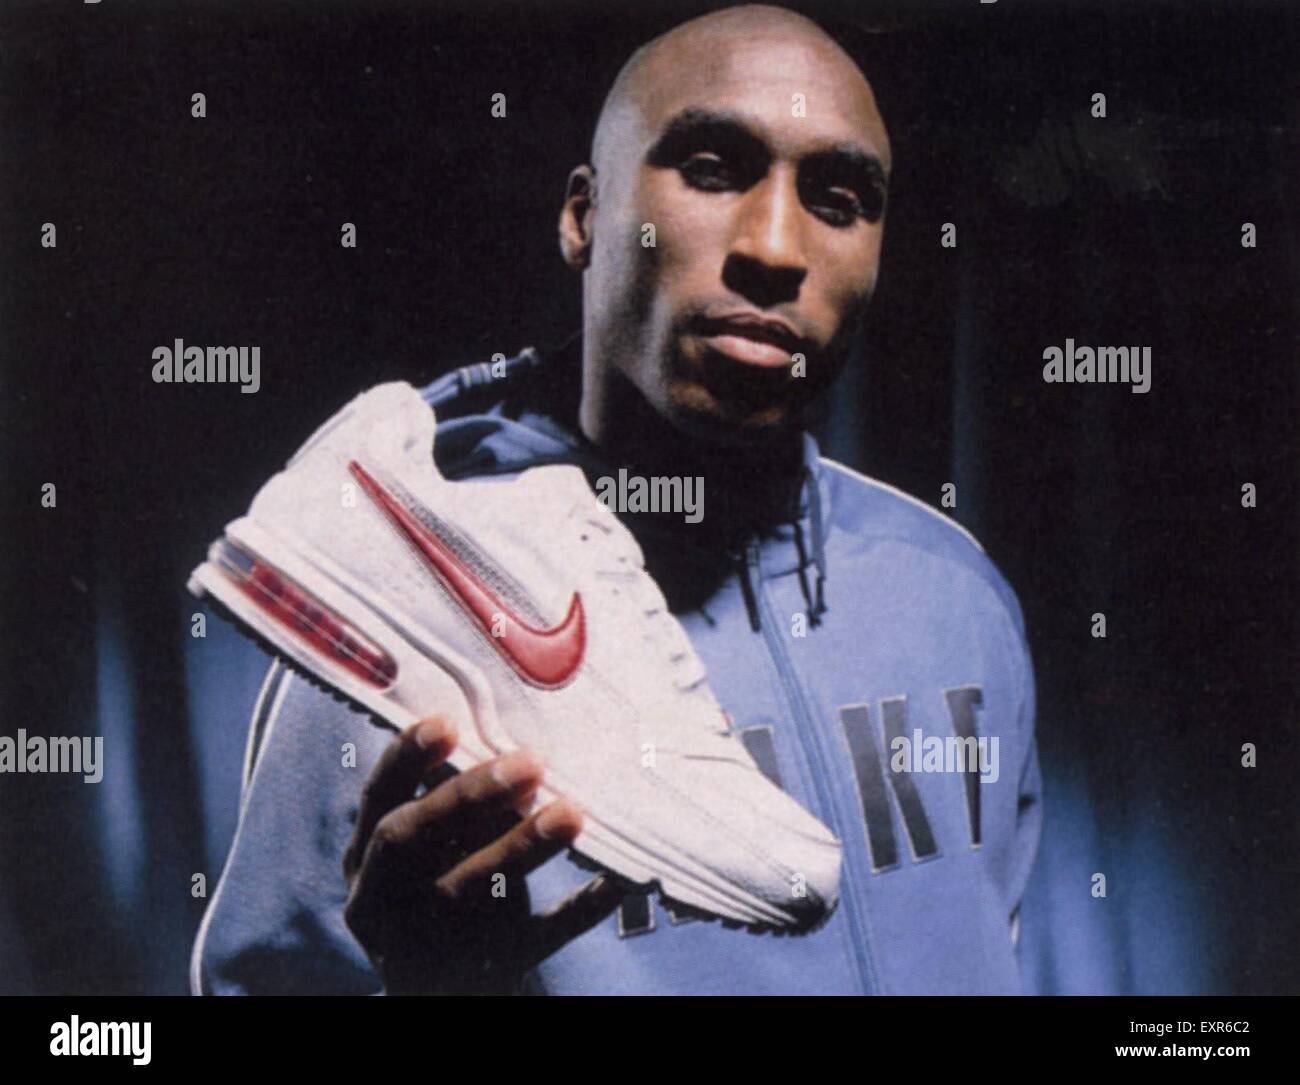 2000s Uk Nike Magazine Advert High Resolution Stock Photography and Images  - Alamy